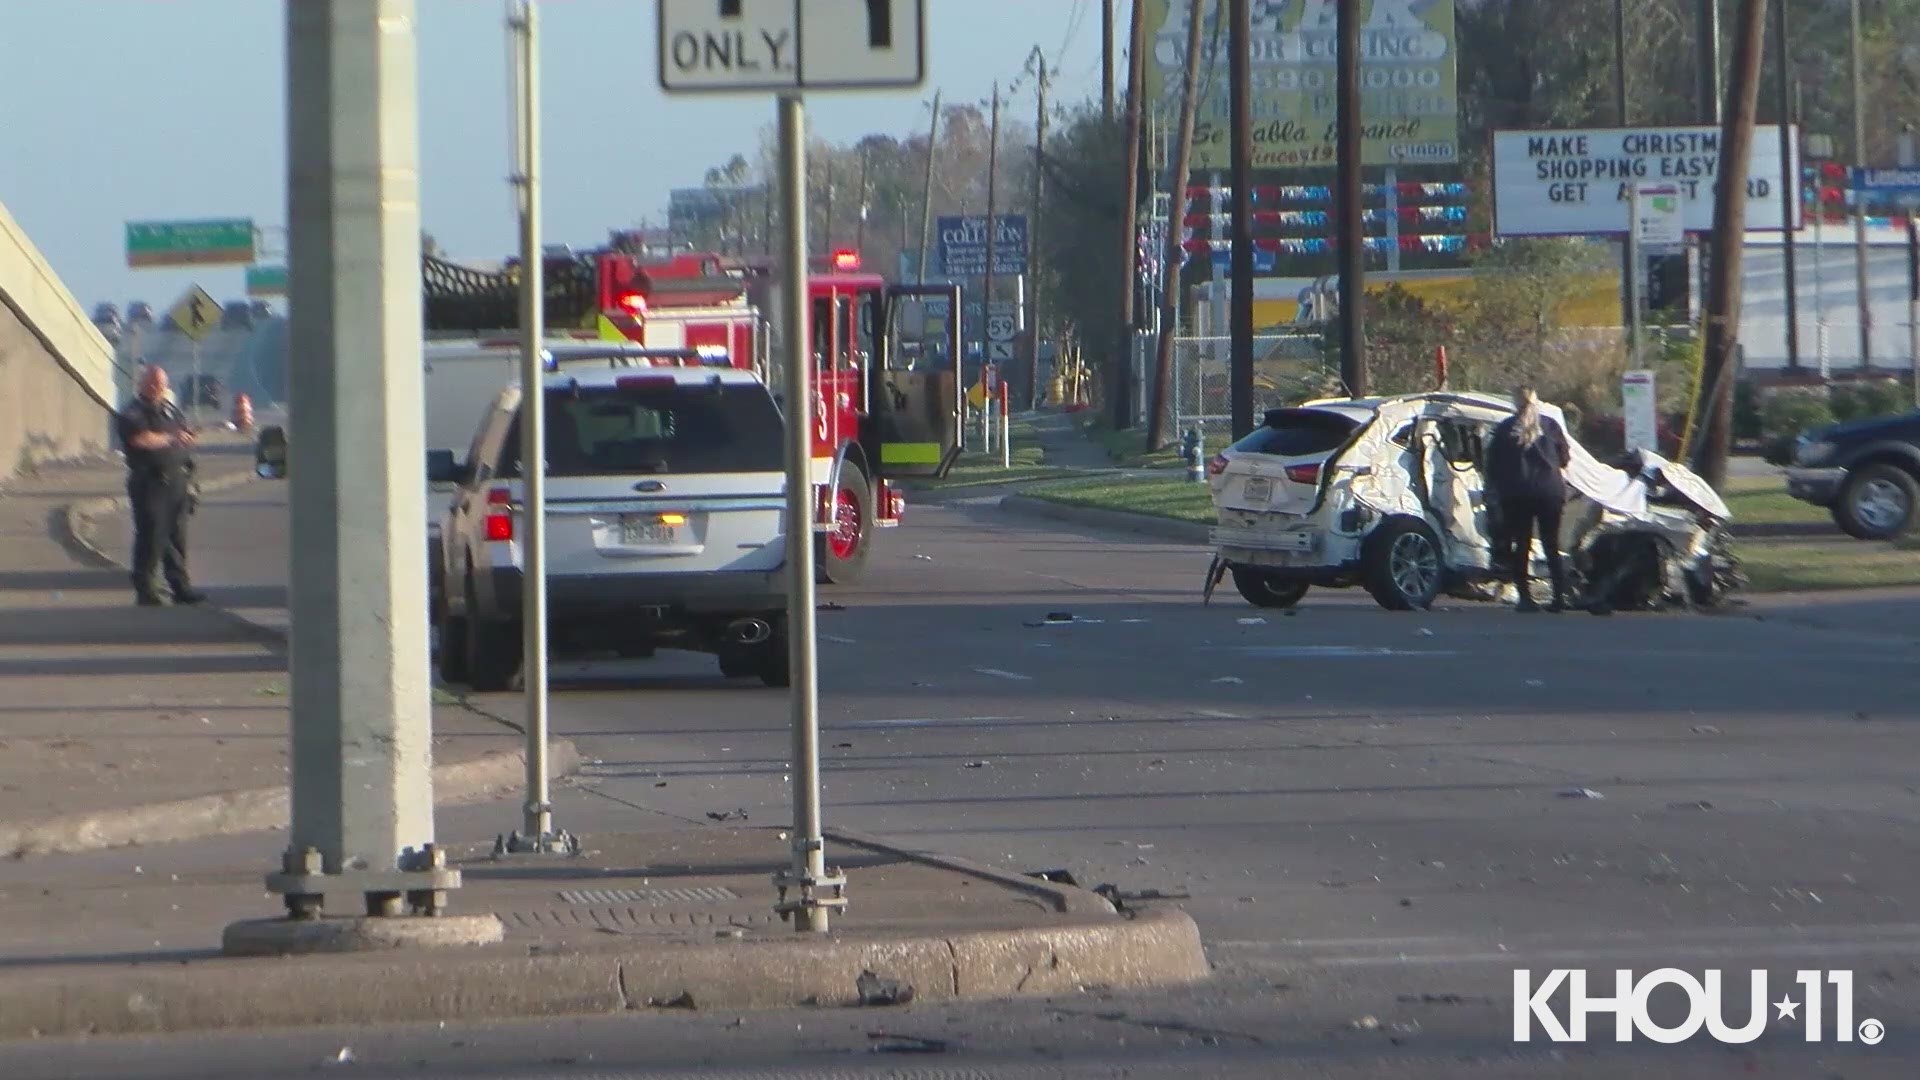 A woman was killed in a 2-vehicle crash on the Eastex Freeway feeder near Little York. The driver of the car involved fled the scene in another vehicle.